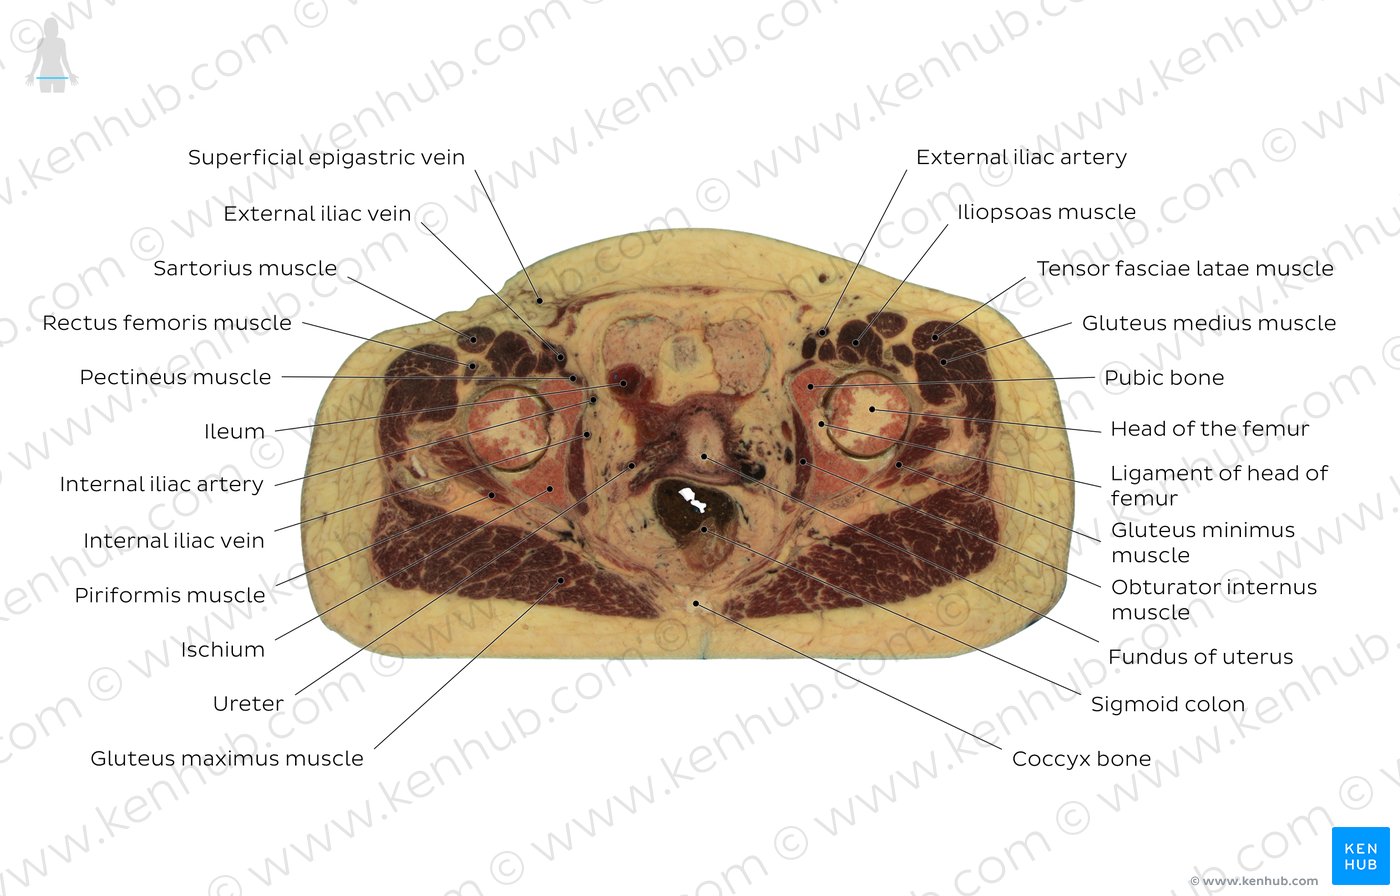 Cross section of the female pelvis through distal end of coccyx: Diagram